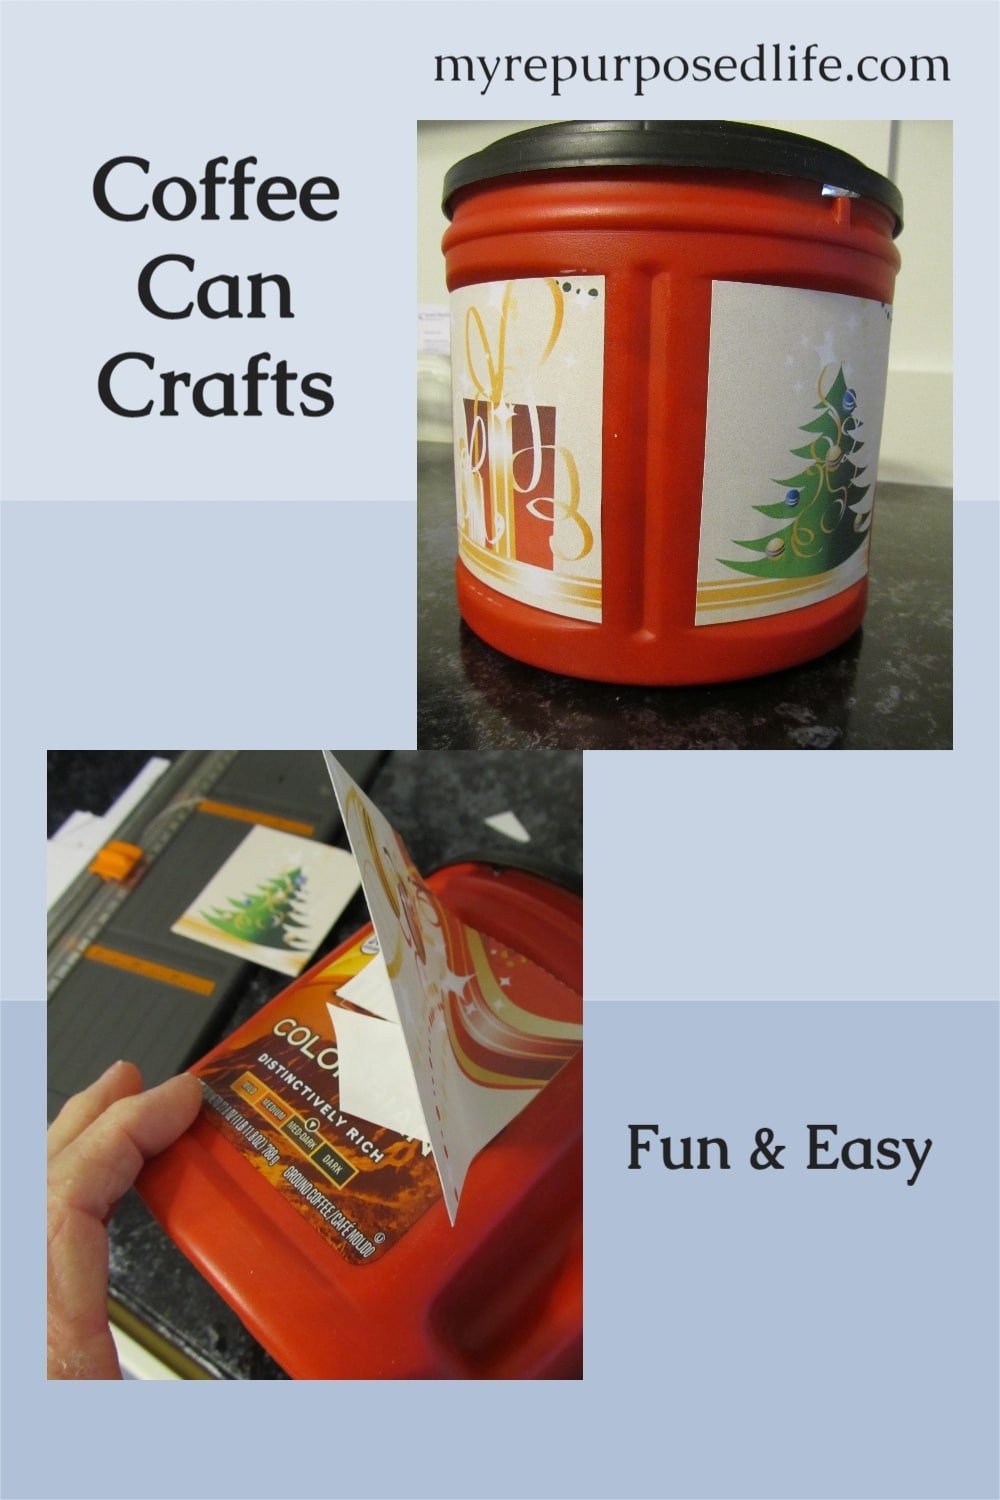 Easy coffee can crafts using folgers coffee canisters and your home printer. These canisters make great storage containers for so many items. via @repurposedlife